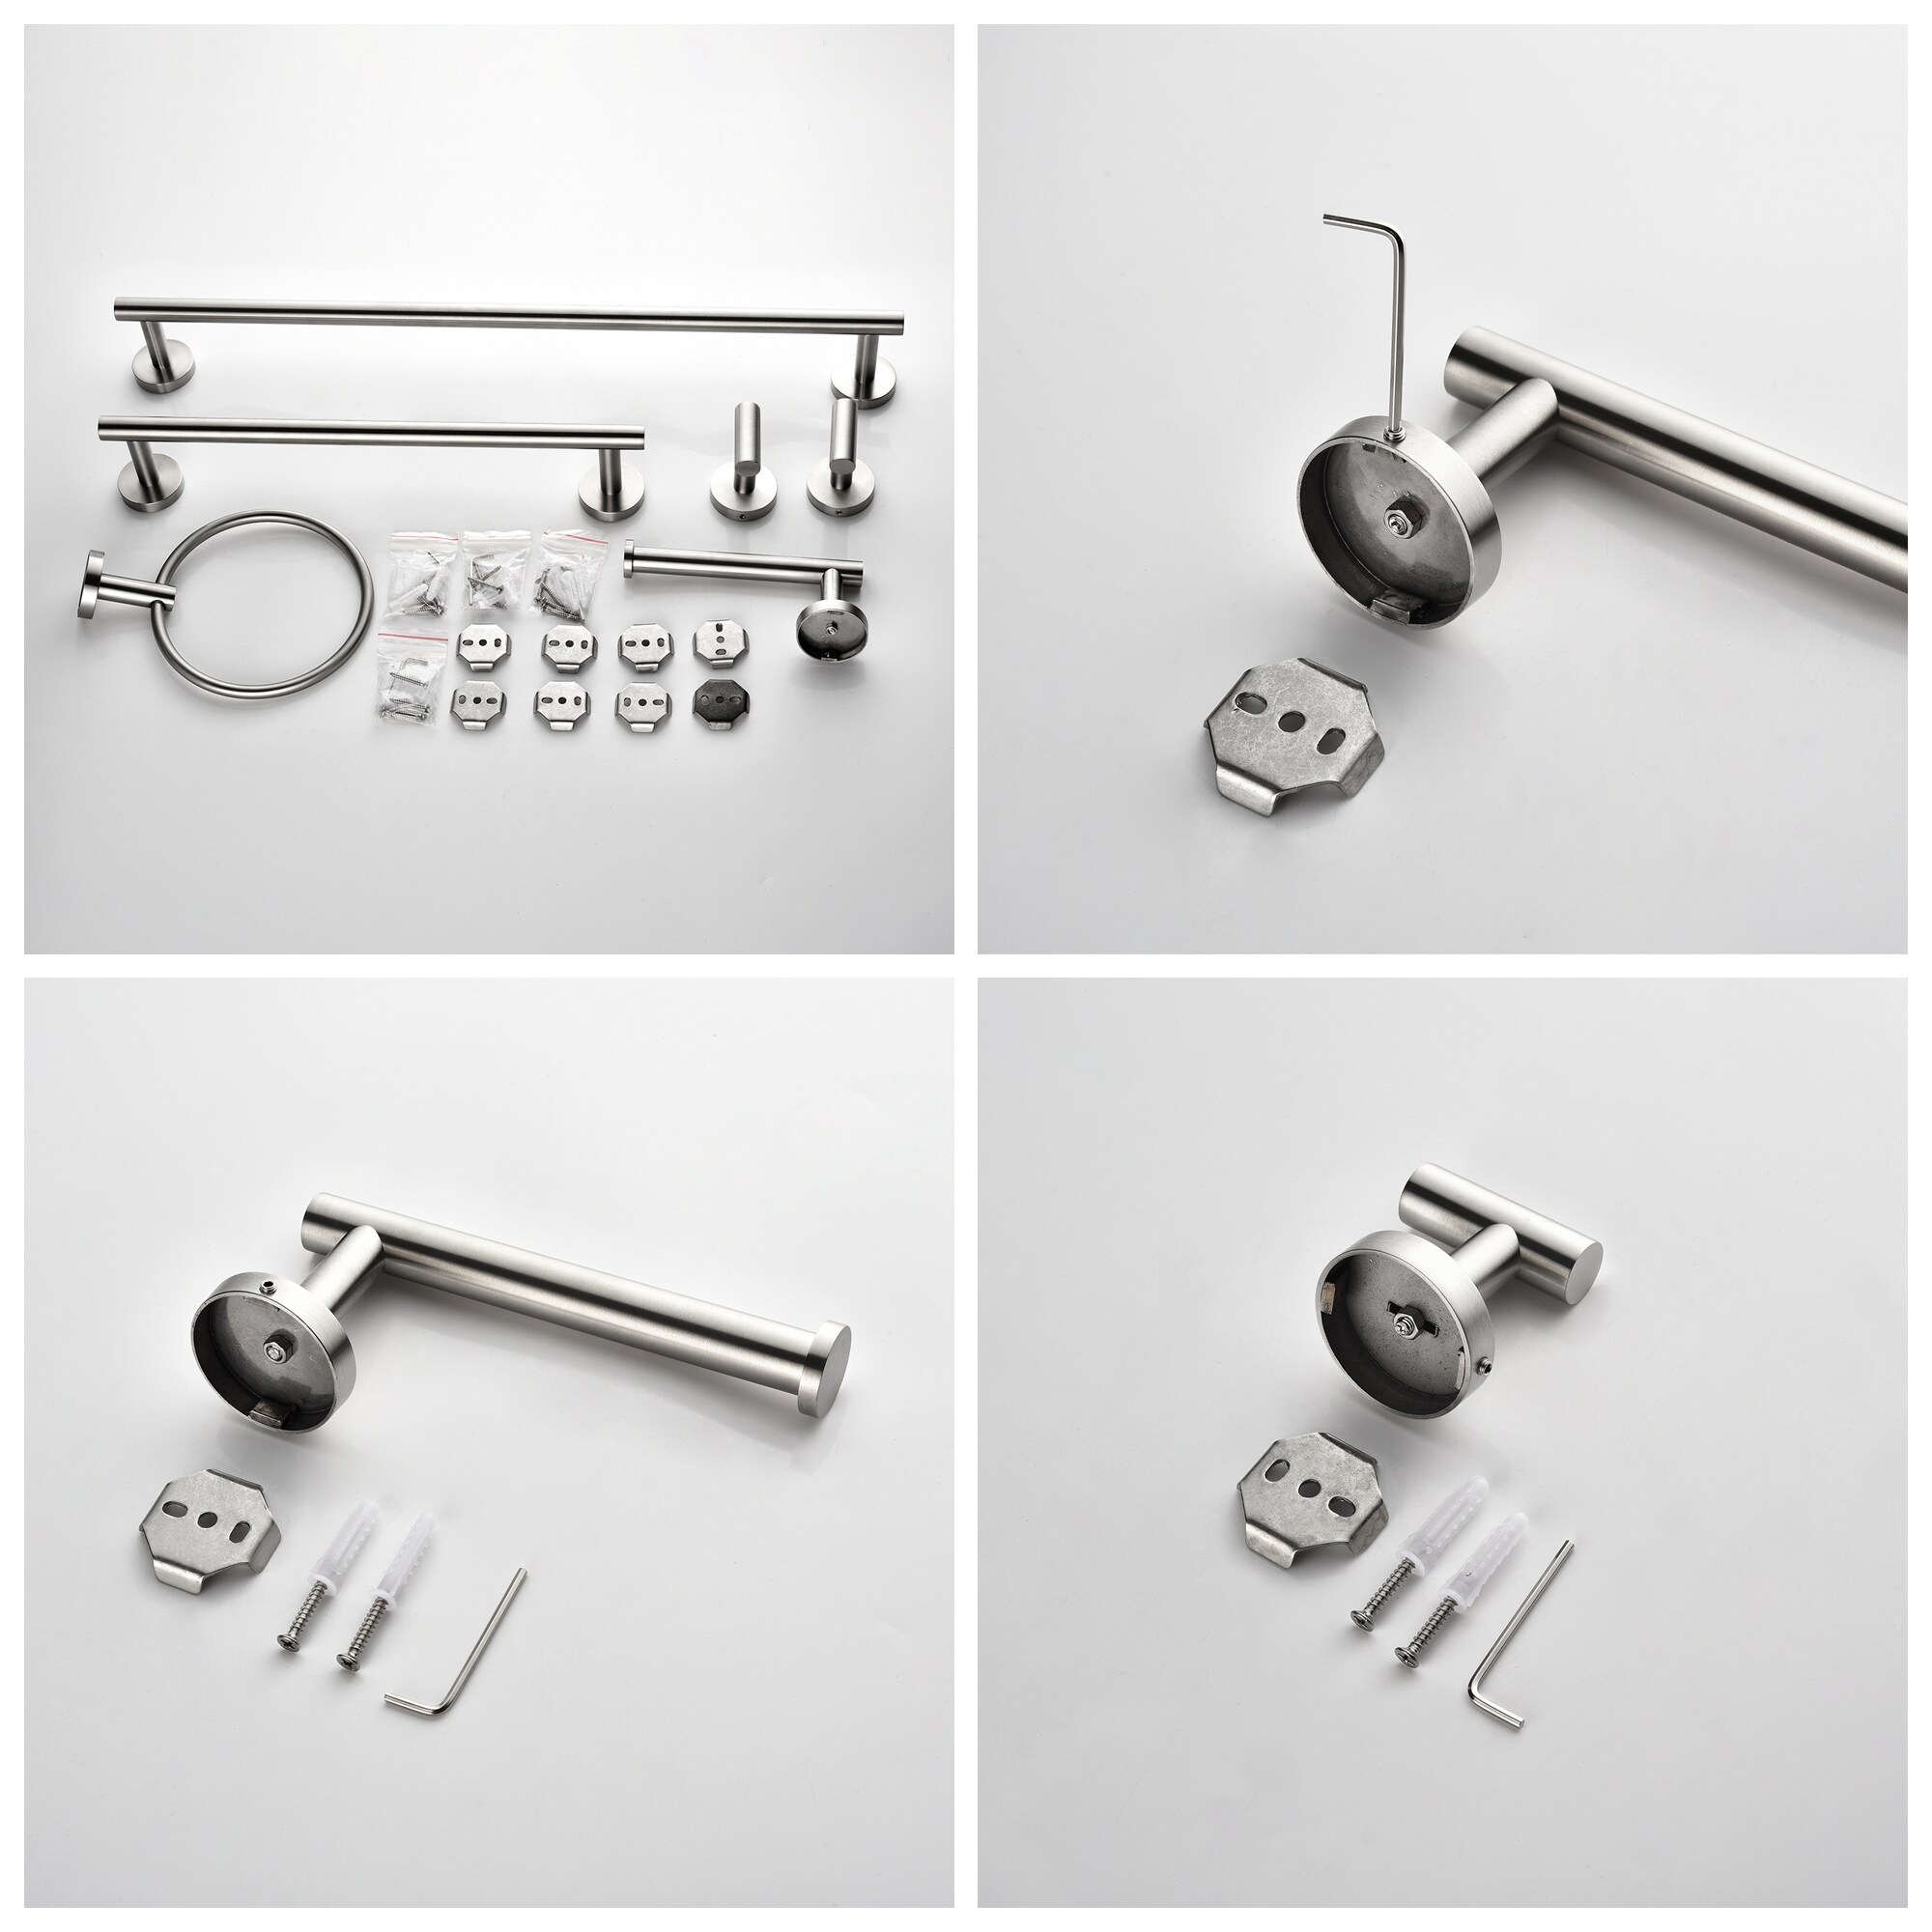 WELLFOR 6-Piece WA Bathroom Hardware Set Brushed Nickel Decorative Bathroom  Hardware Set with Towel Bar, Toilet Paper Holder, Towel Ring and Robe Hook  in the Decorative Bathroom Hardware Sets department at